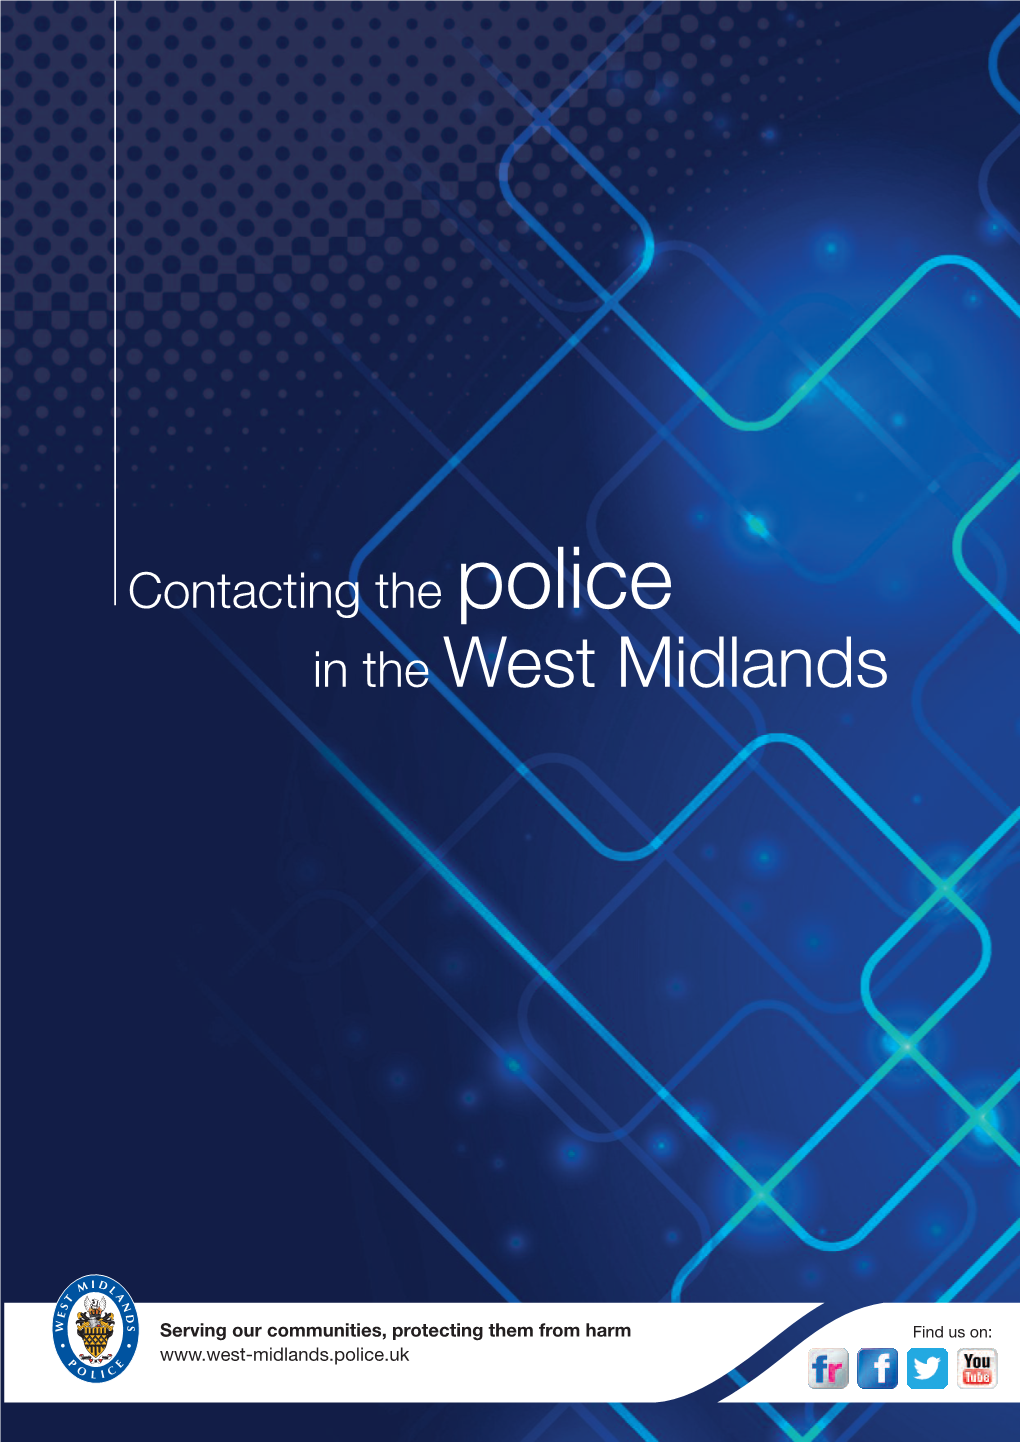 Contacting the Police in the West Midlands